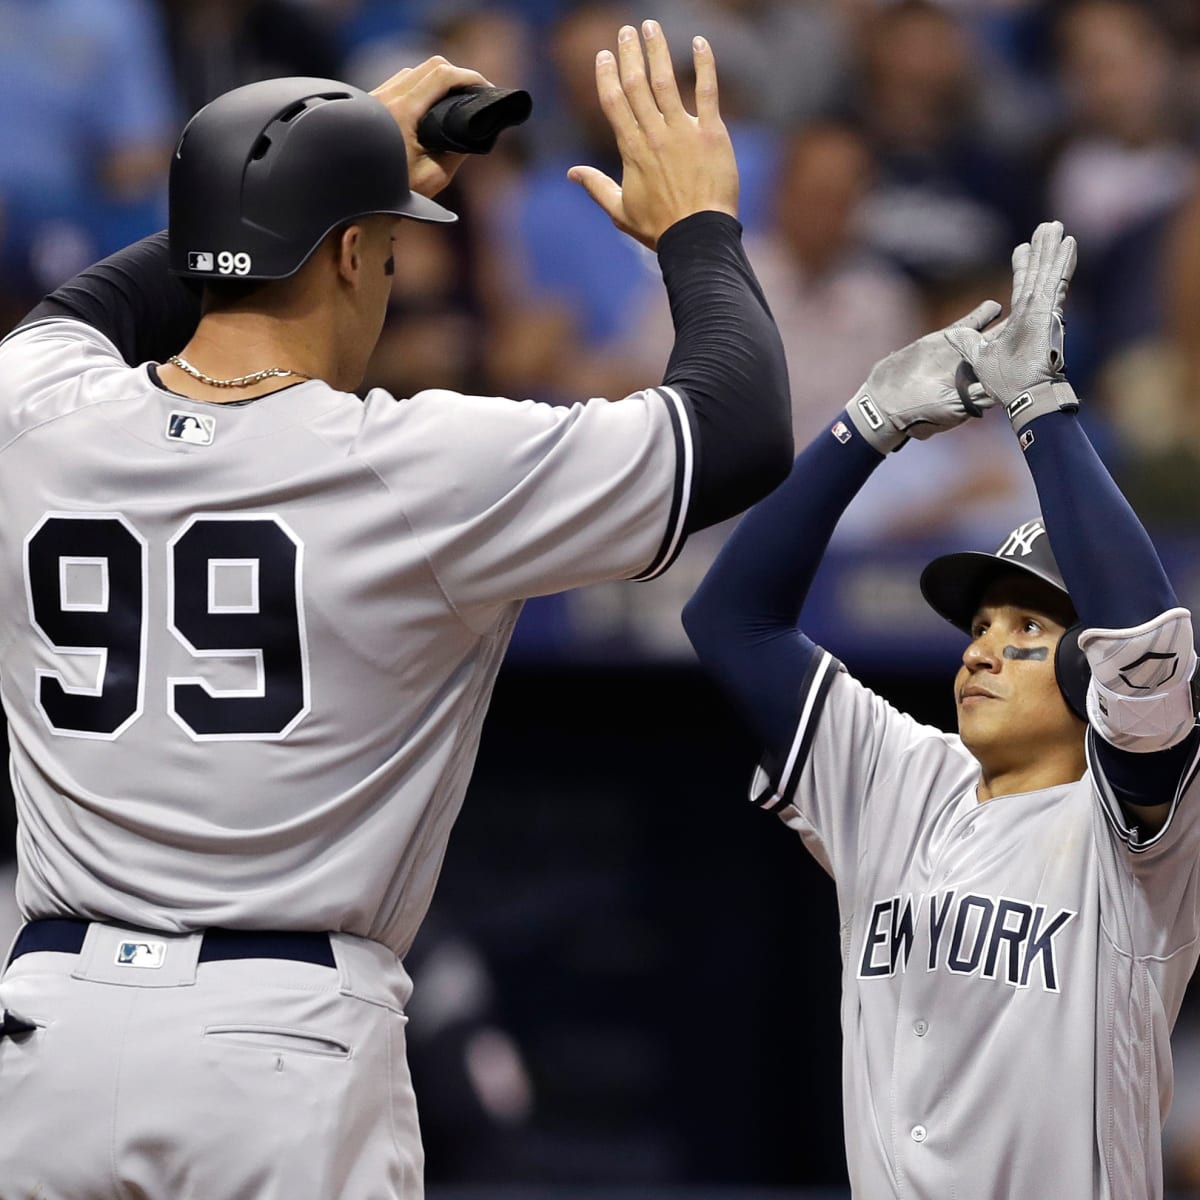 Aaron Judge of the Yankees Hits Homers, Makes Other Players Look Tiny  (PHOTOS)